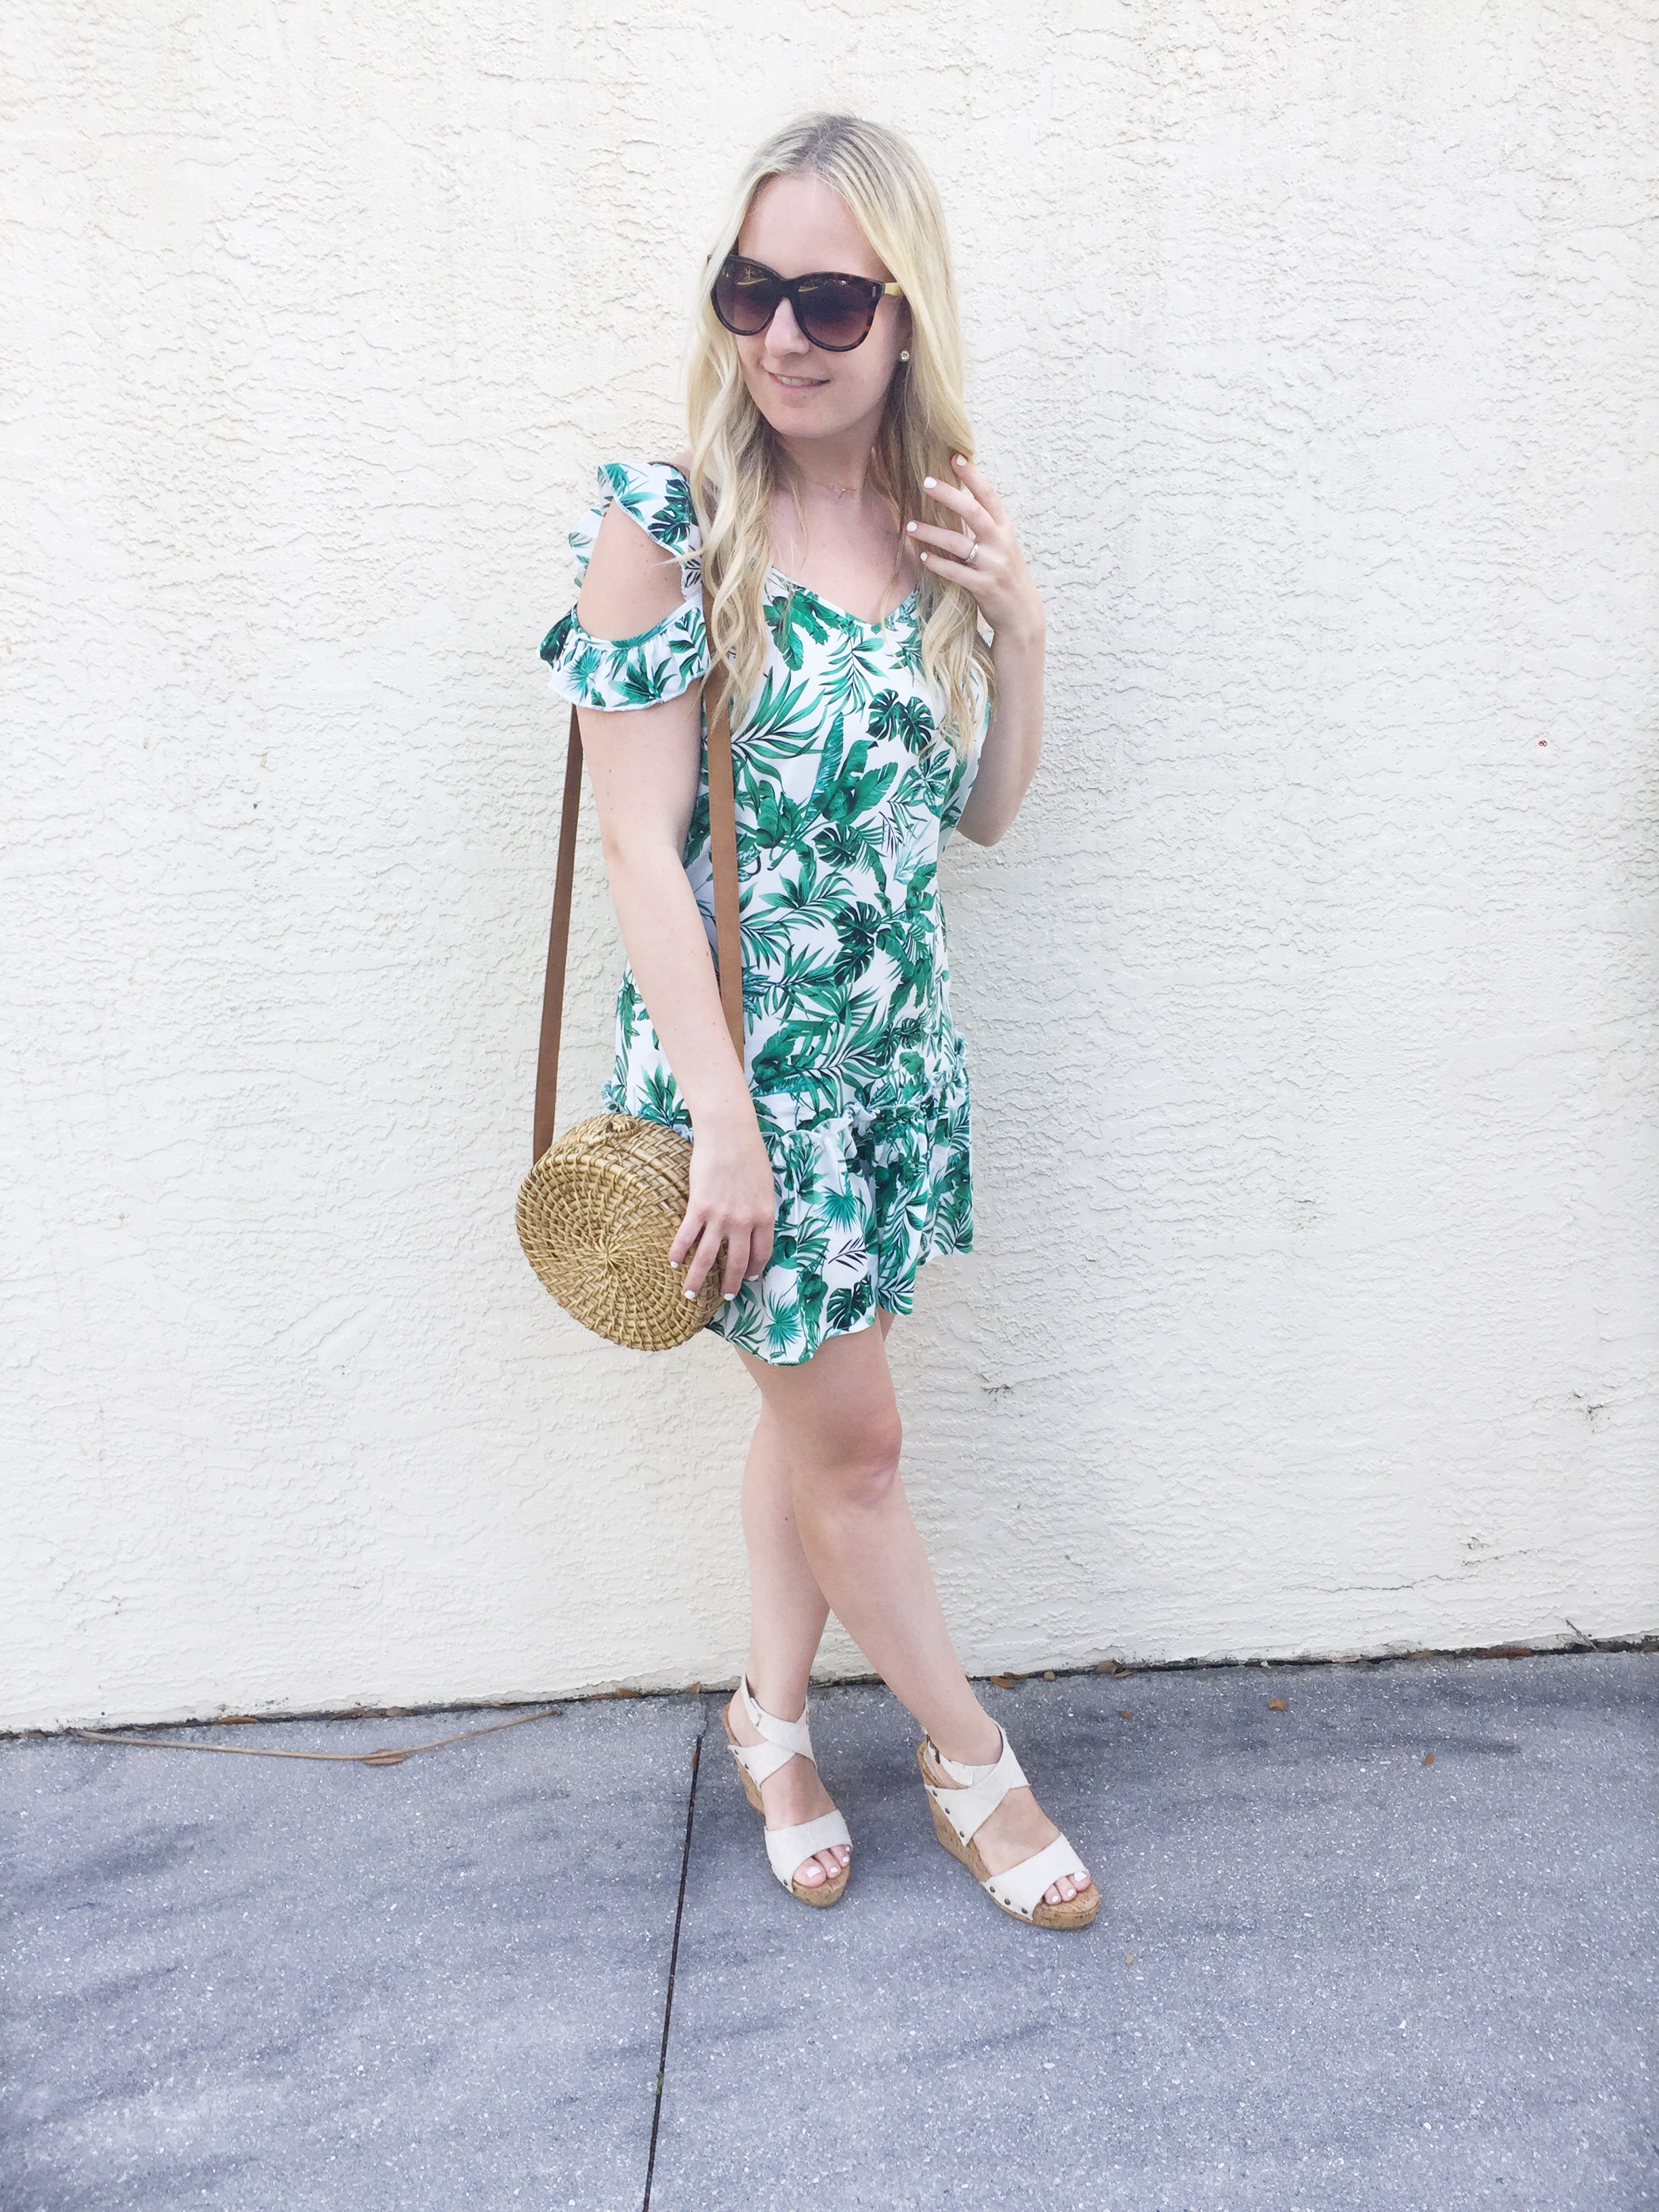 Palm Leaf Dress on Livin' Life with Style